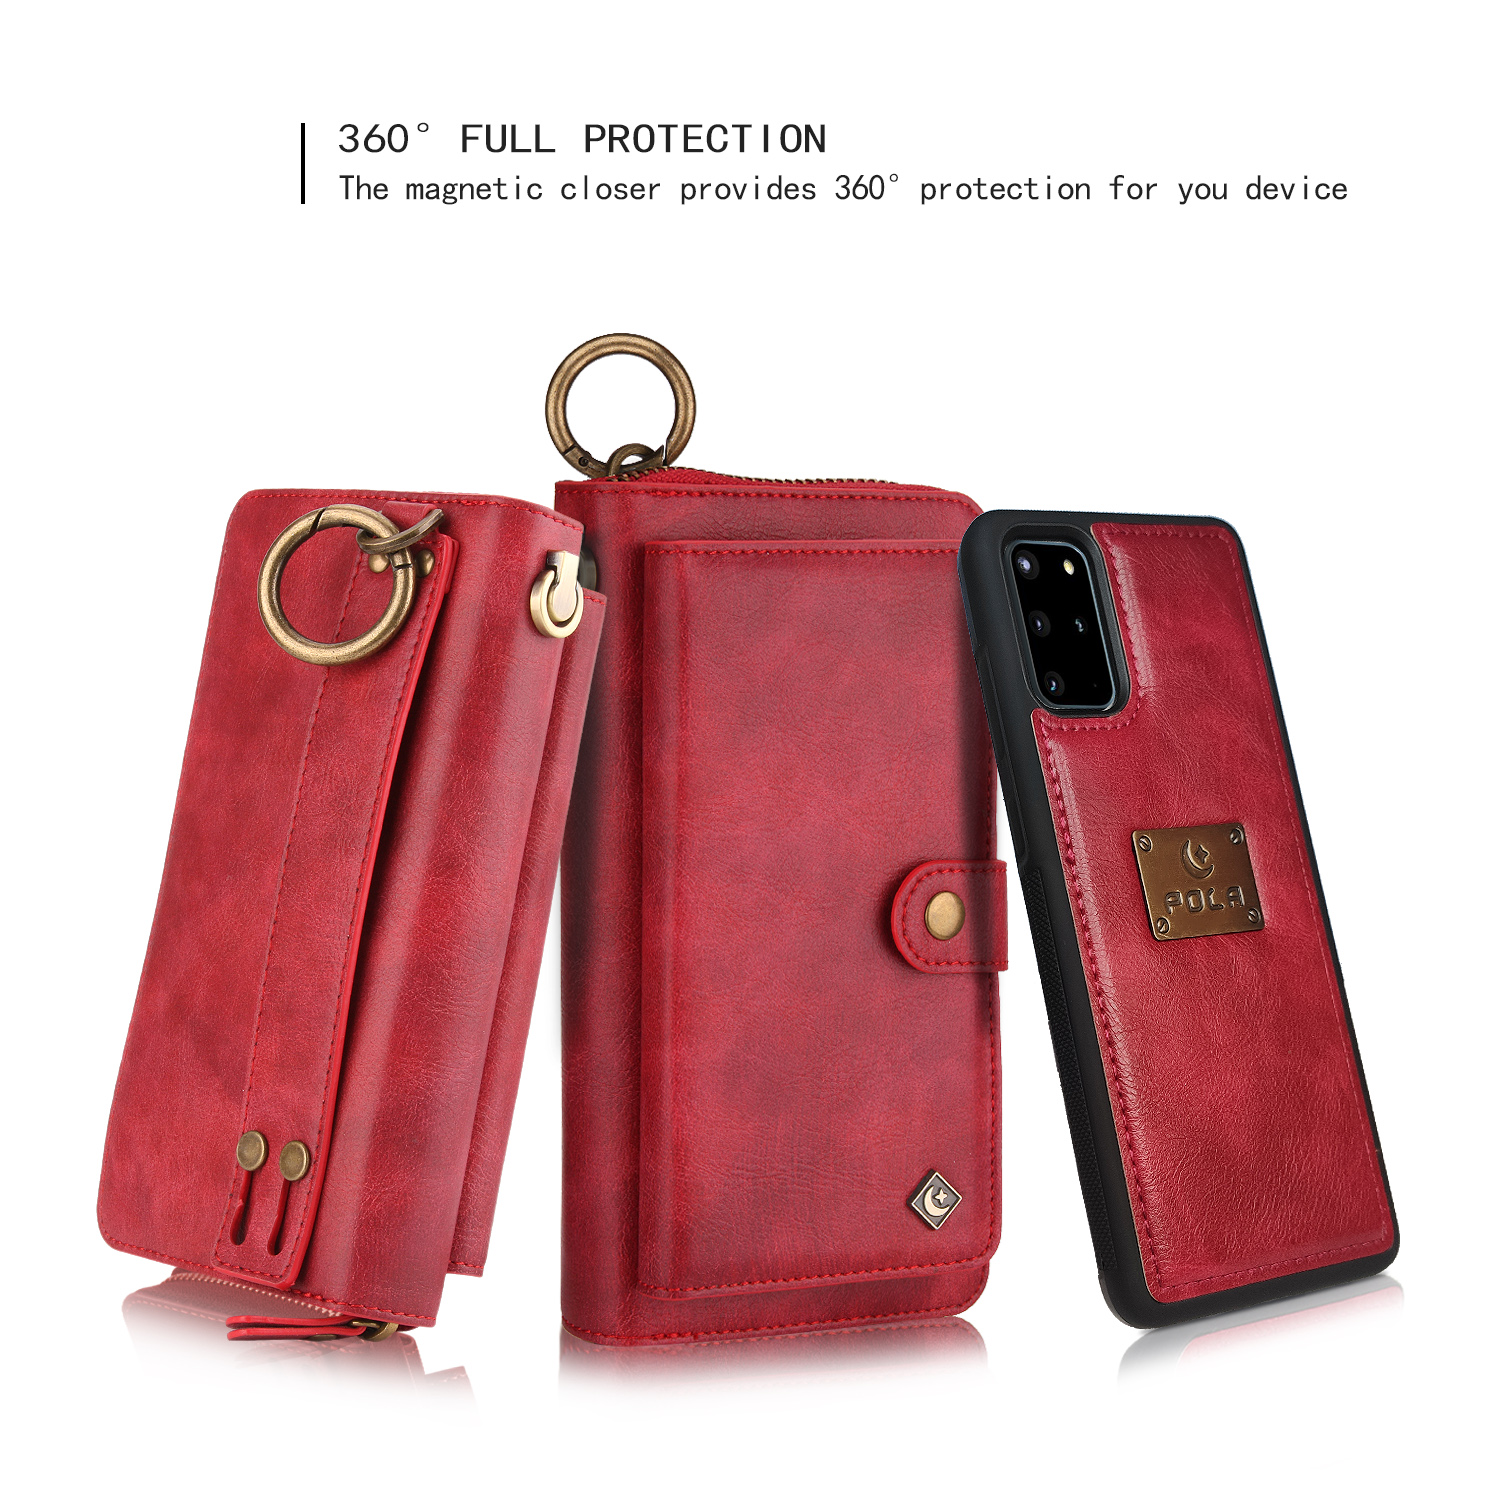 Galaxy S20+ Plus Case, Allytech Retro PU Leather Magnetic Detachable Back Cover Zipper Wallet Folio Multiple Cards Slots Purse Wrist Strap Clutch Protective Case for Samsung Galaxy S20 Plus,Red - image 2 of 9